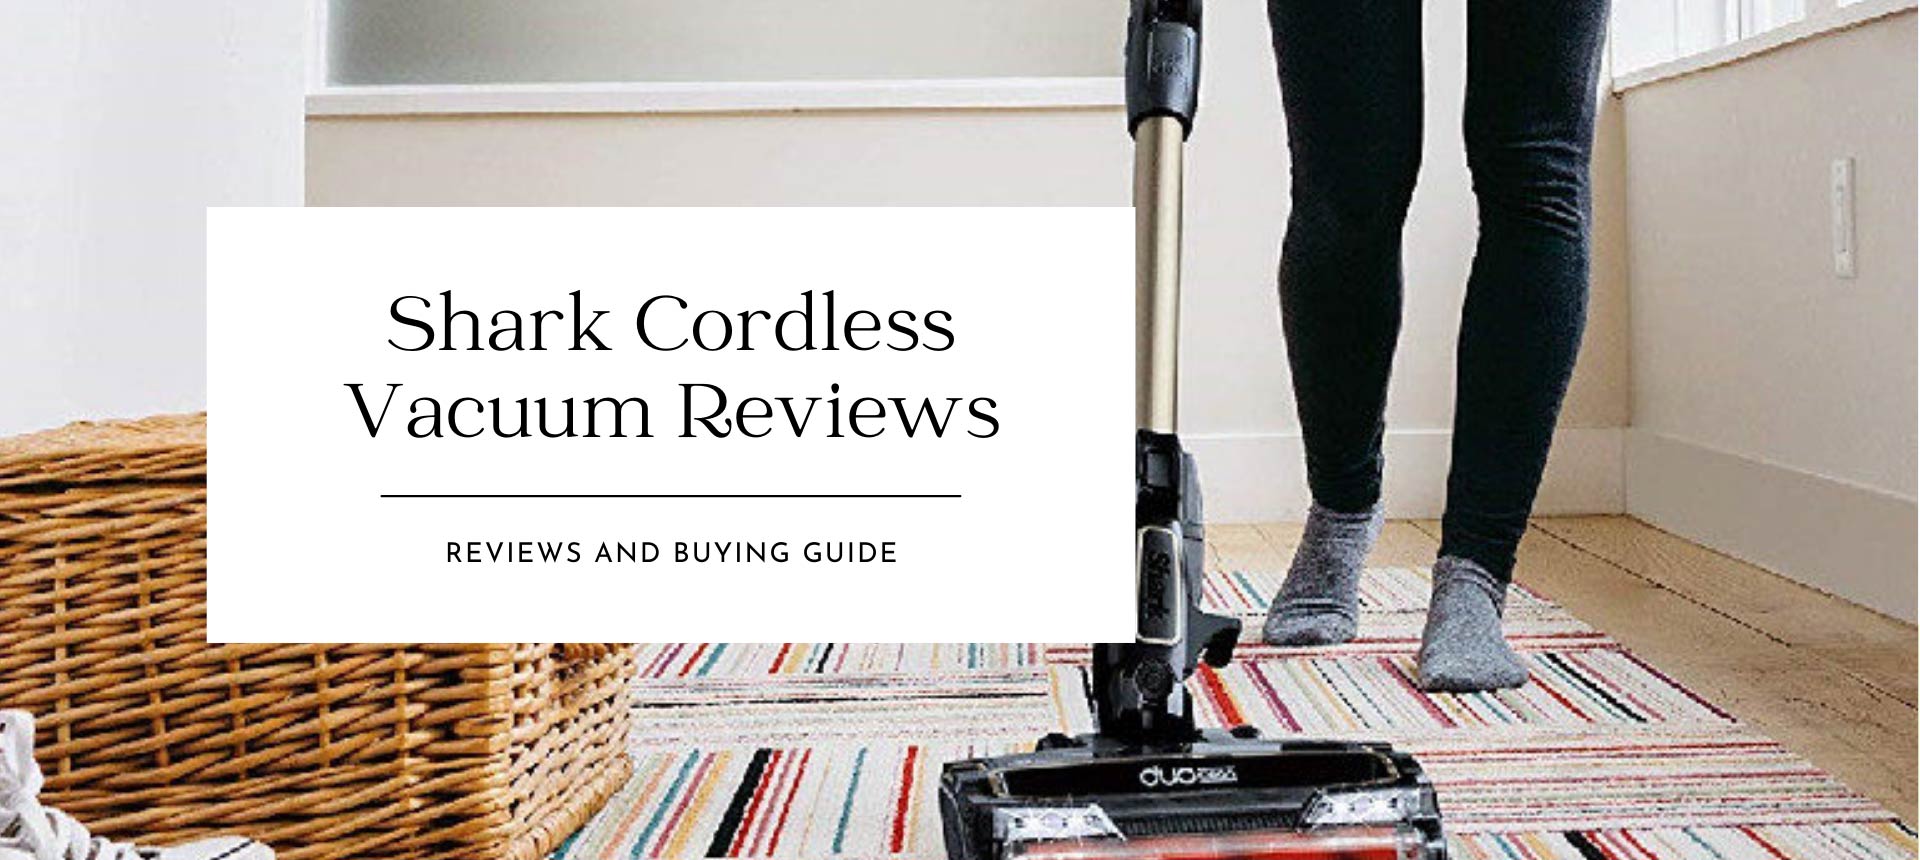 The Best Shark Cordless Vacuums of 2021: Reviews